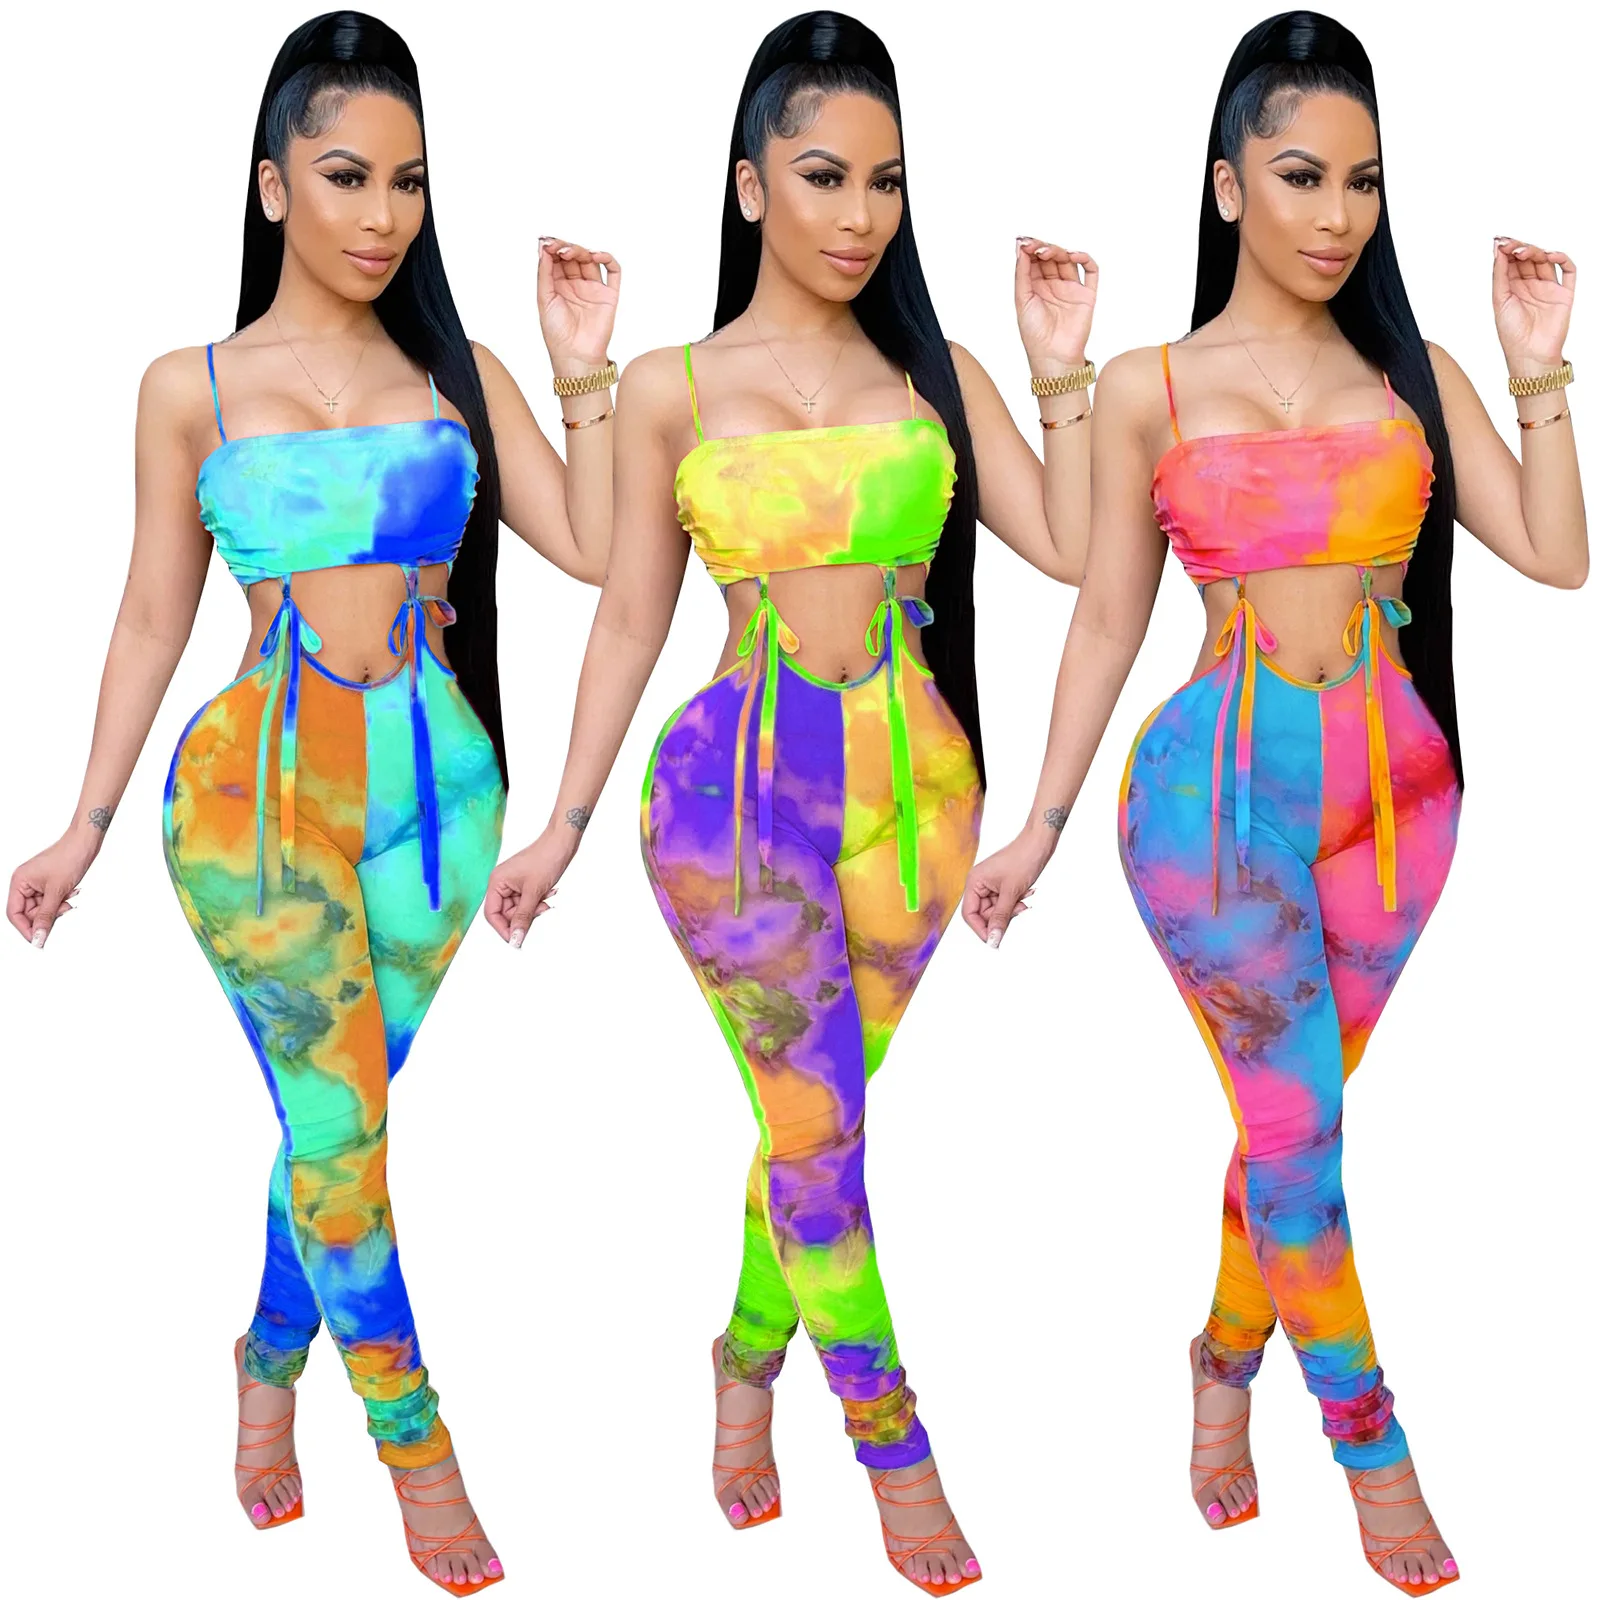 

DUODUOCOLOR Summer 2021 new style printed backless suspenders women clothing casual sleeveless ladies sexy jumpsuit D10572, Orange, purple, peacock blue